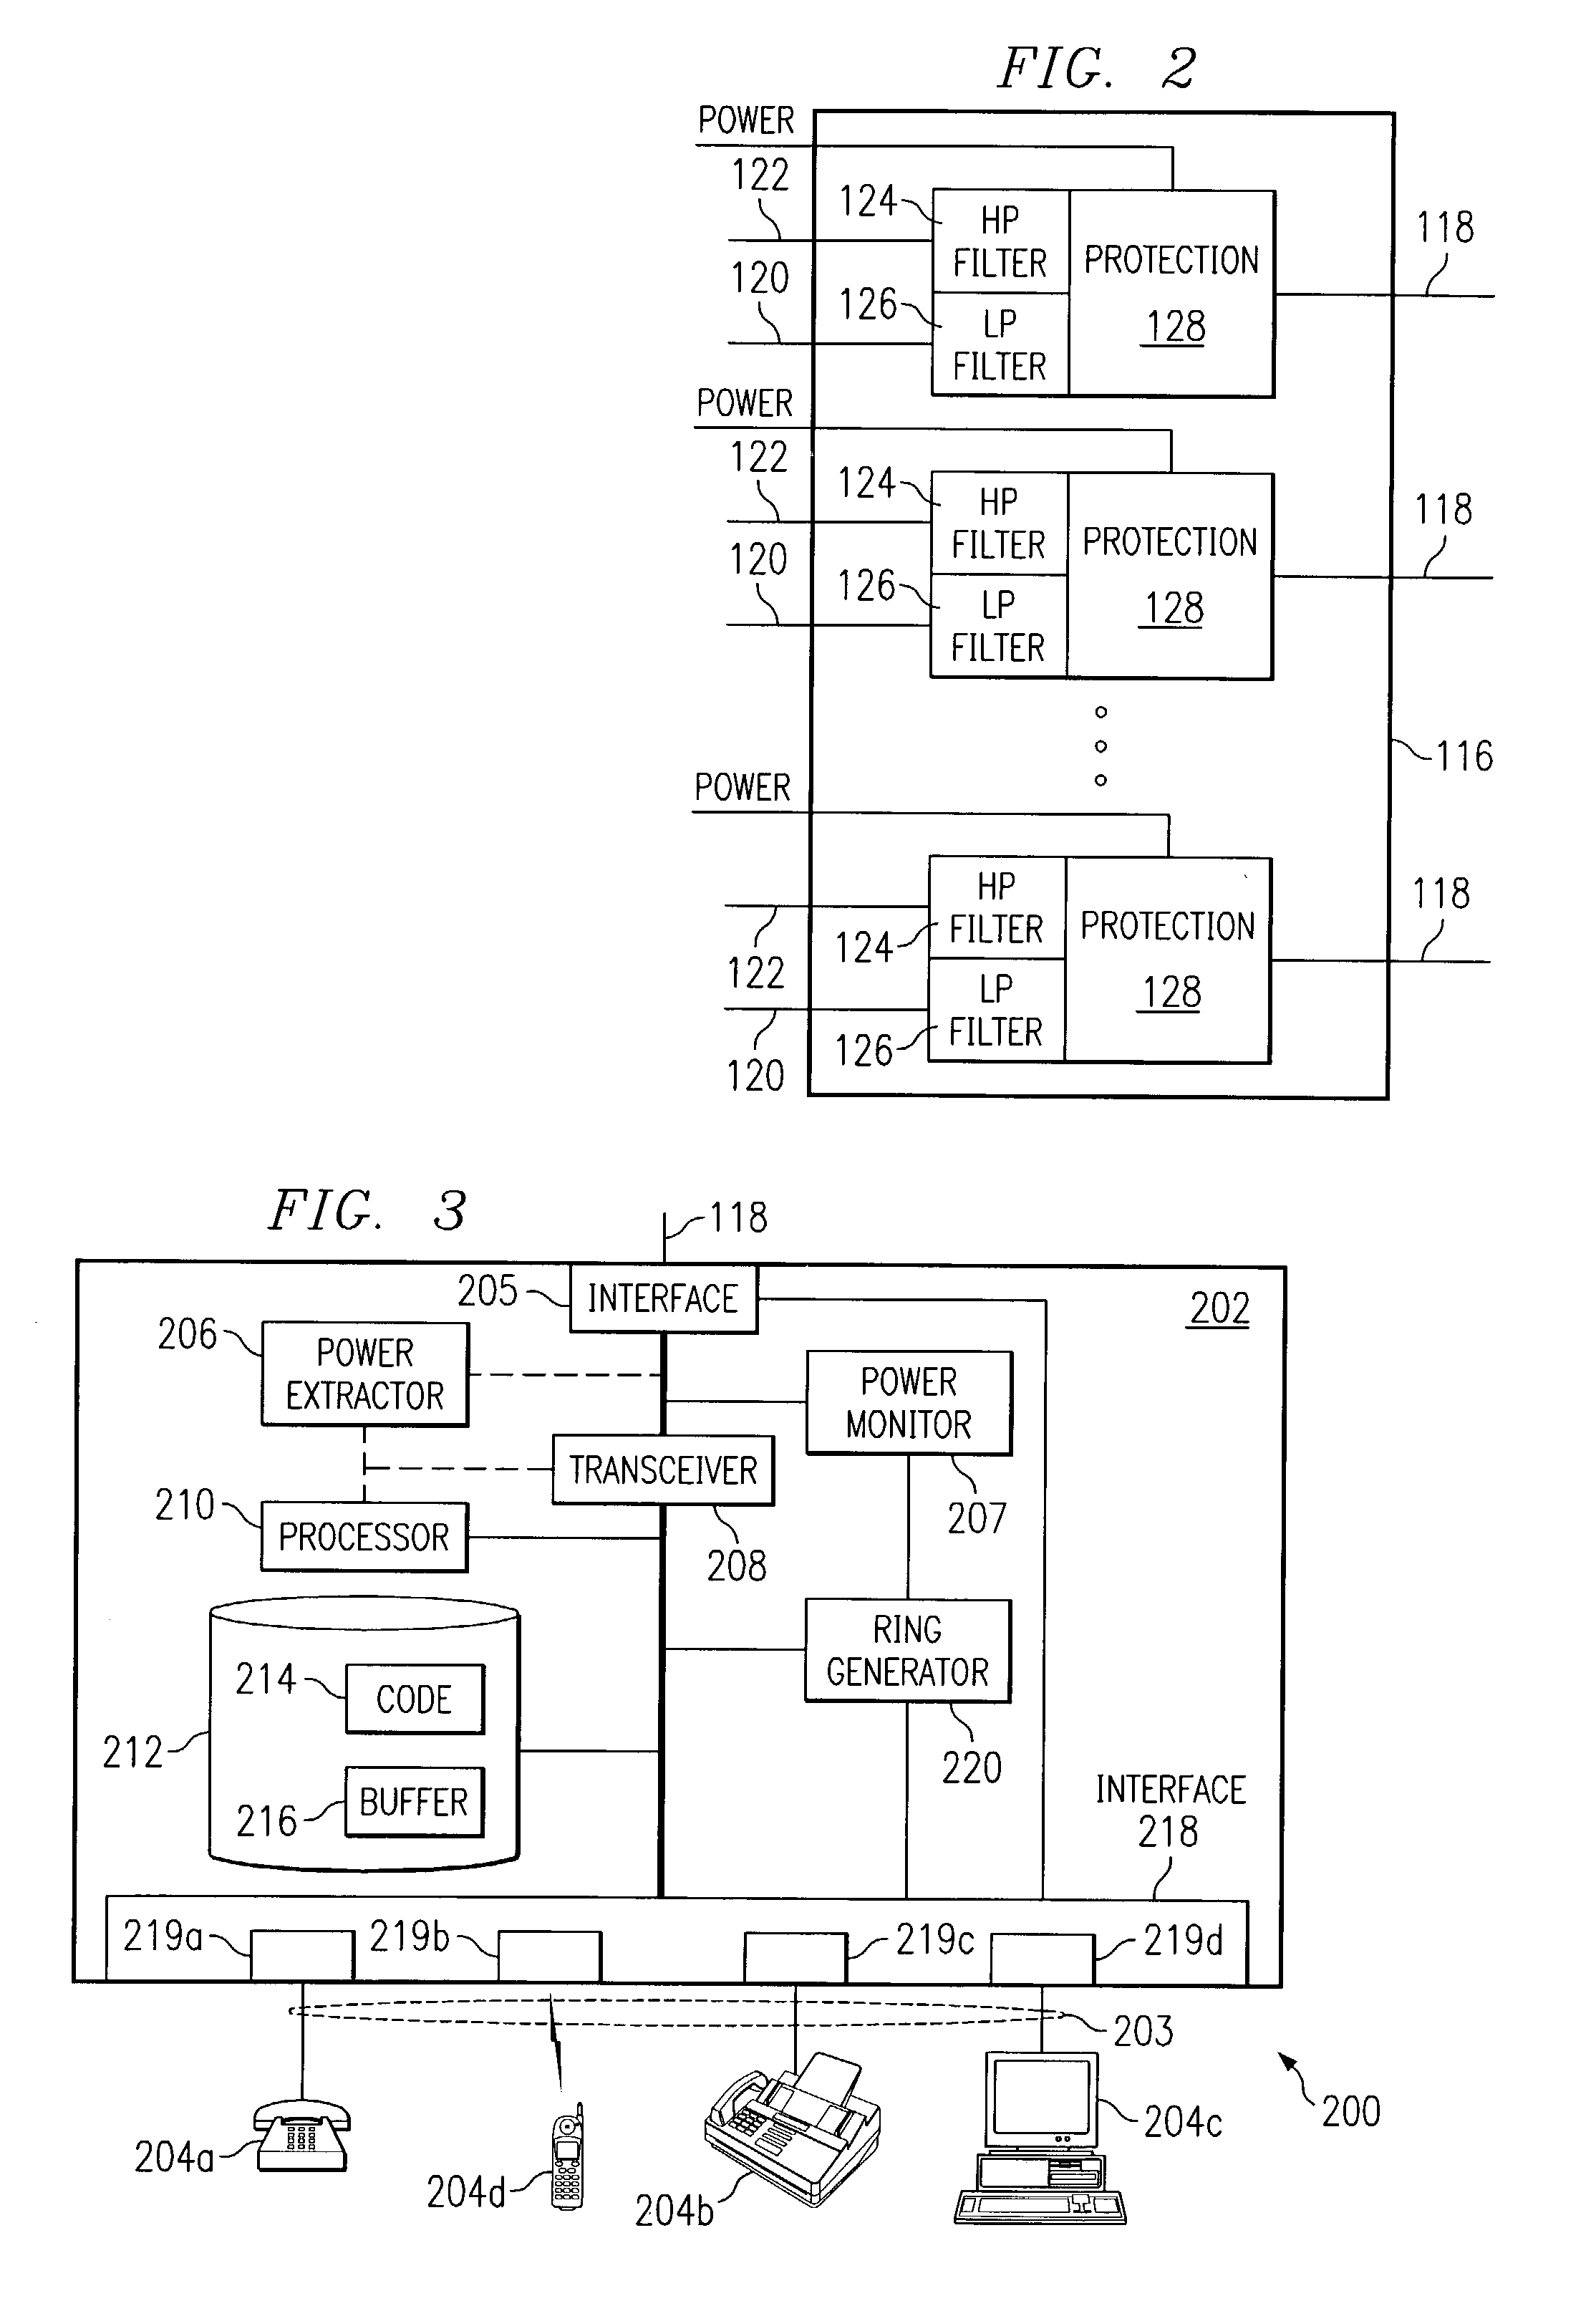 Line-powered network interface device